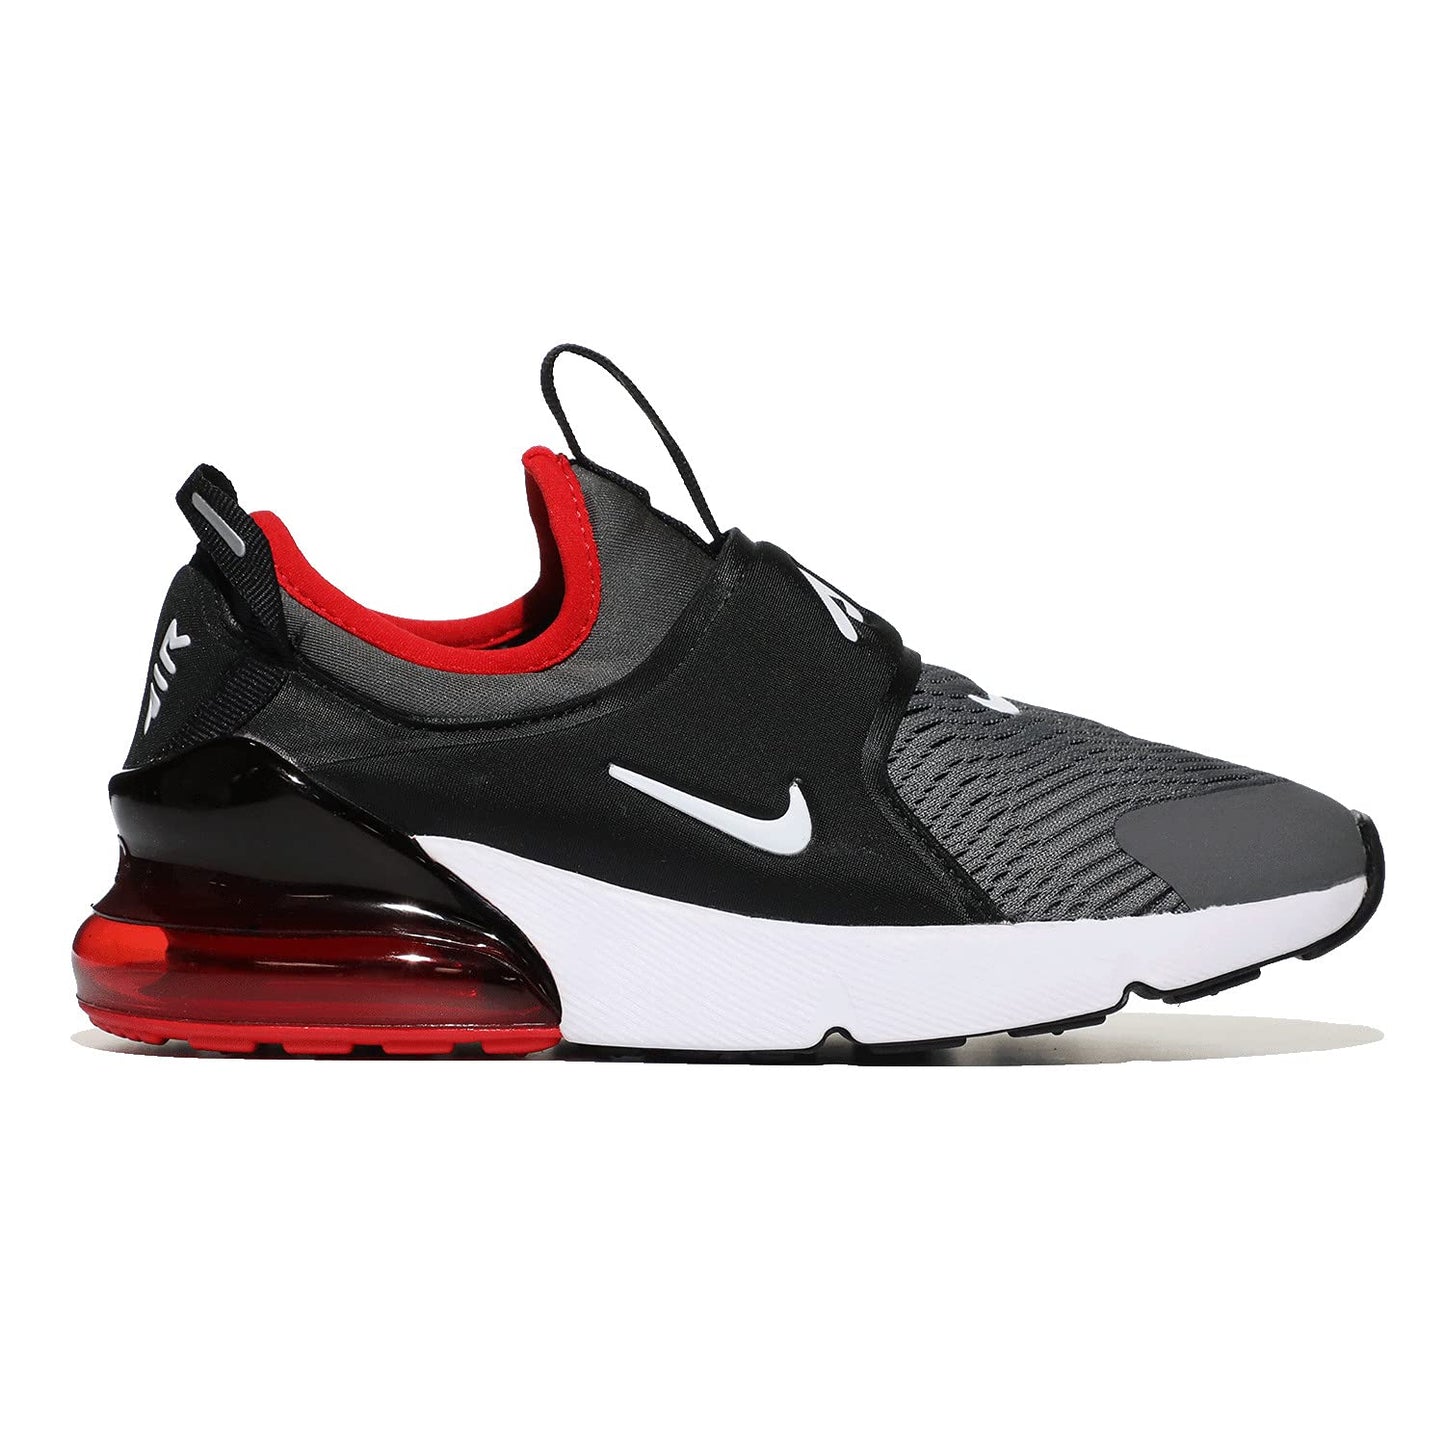 Image 5 of Air Max 270 Extreme (Little Kid)